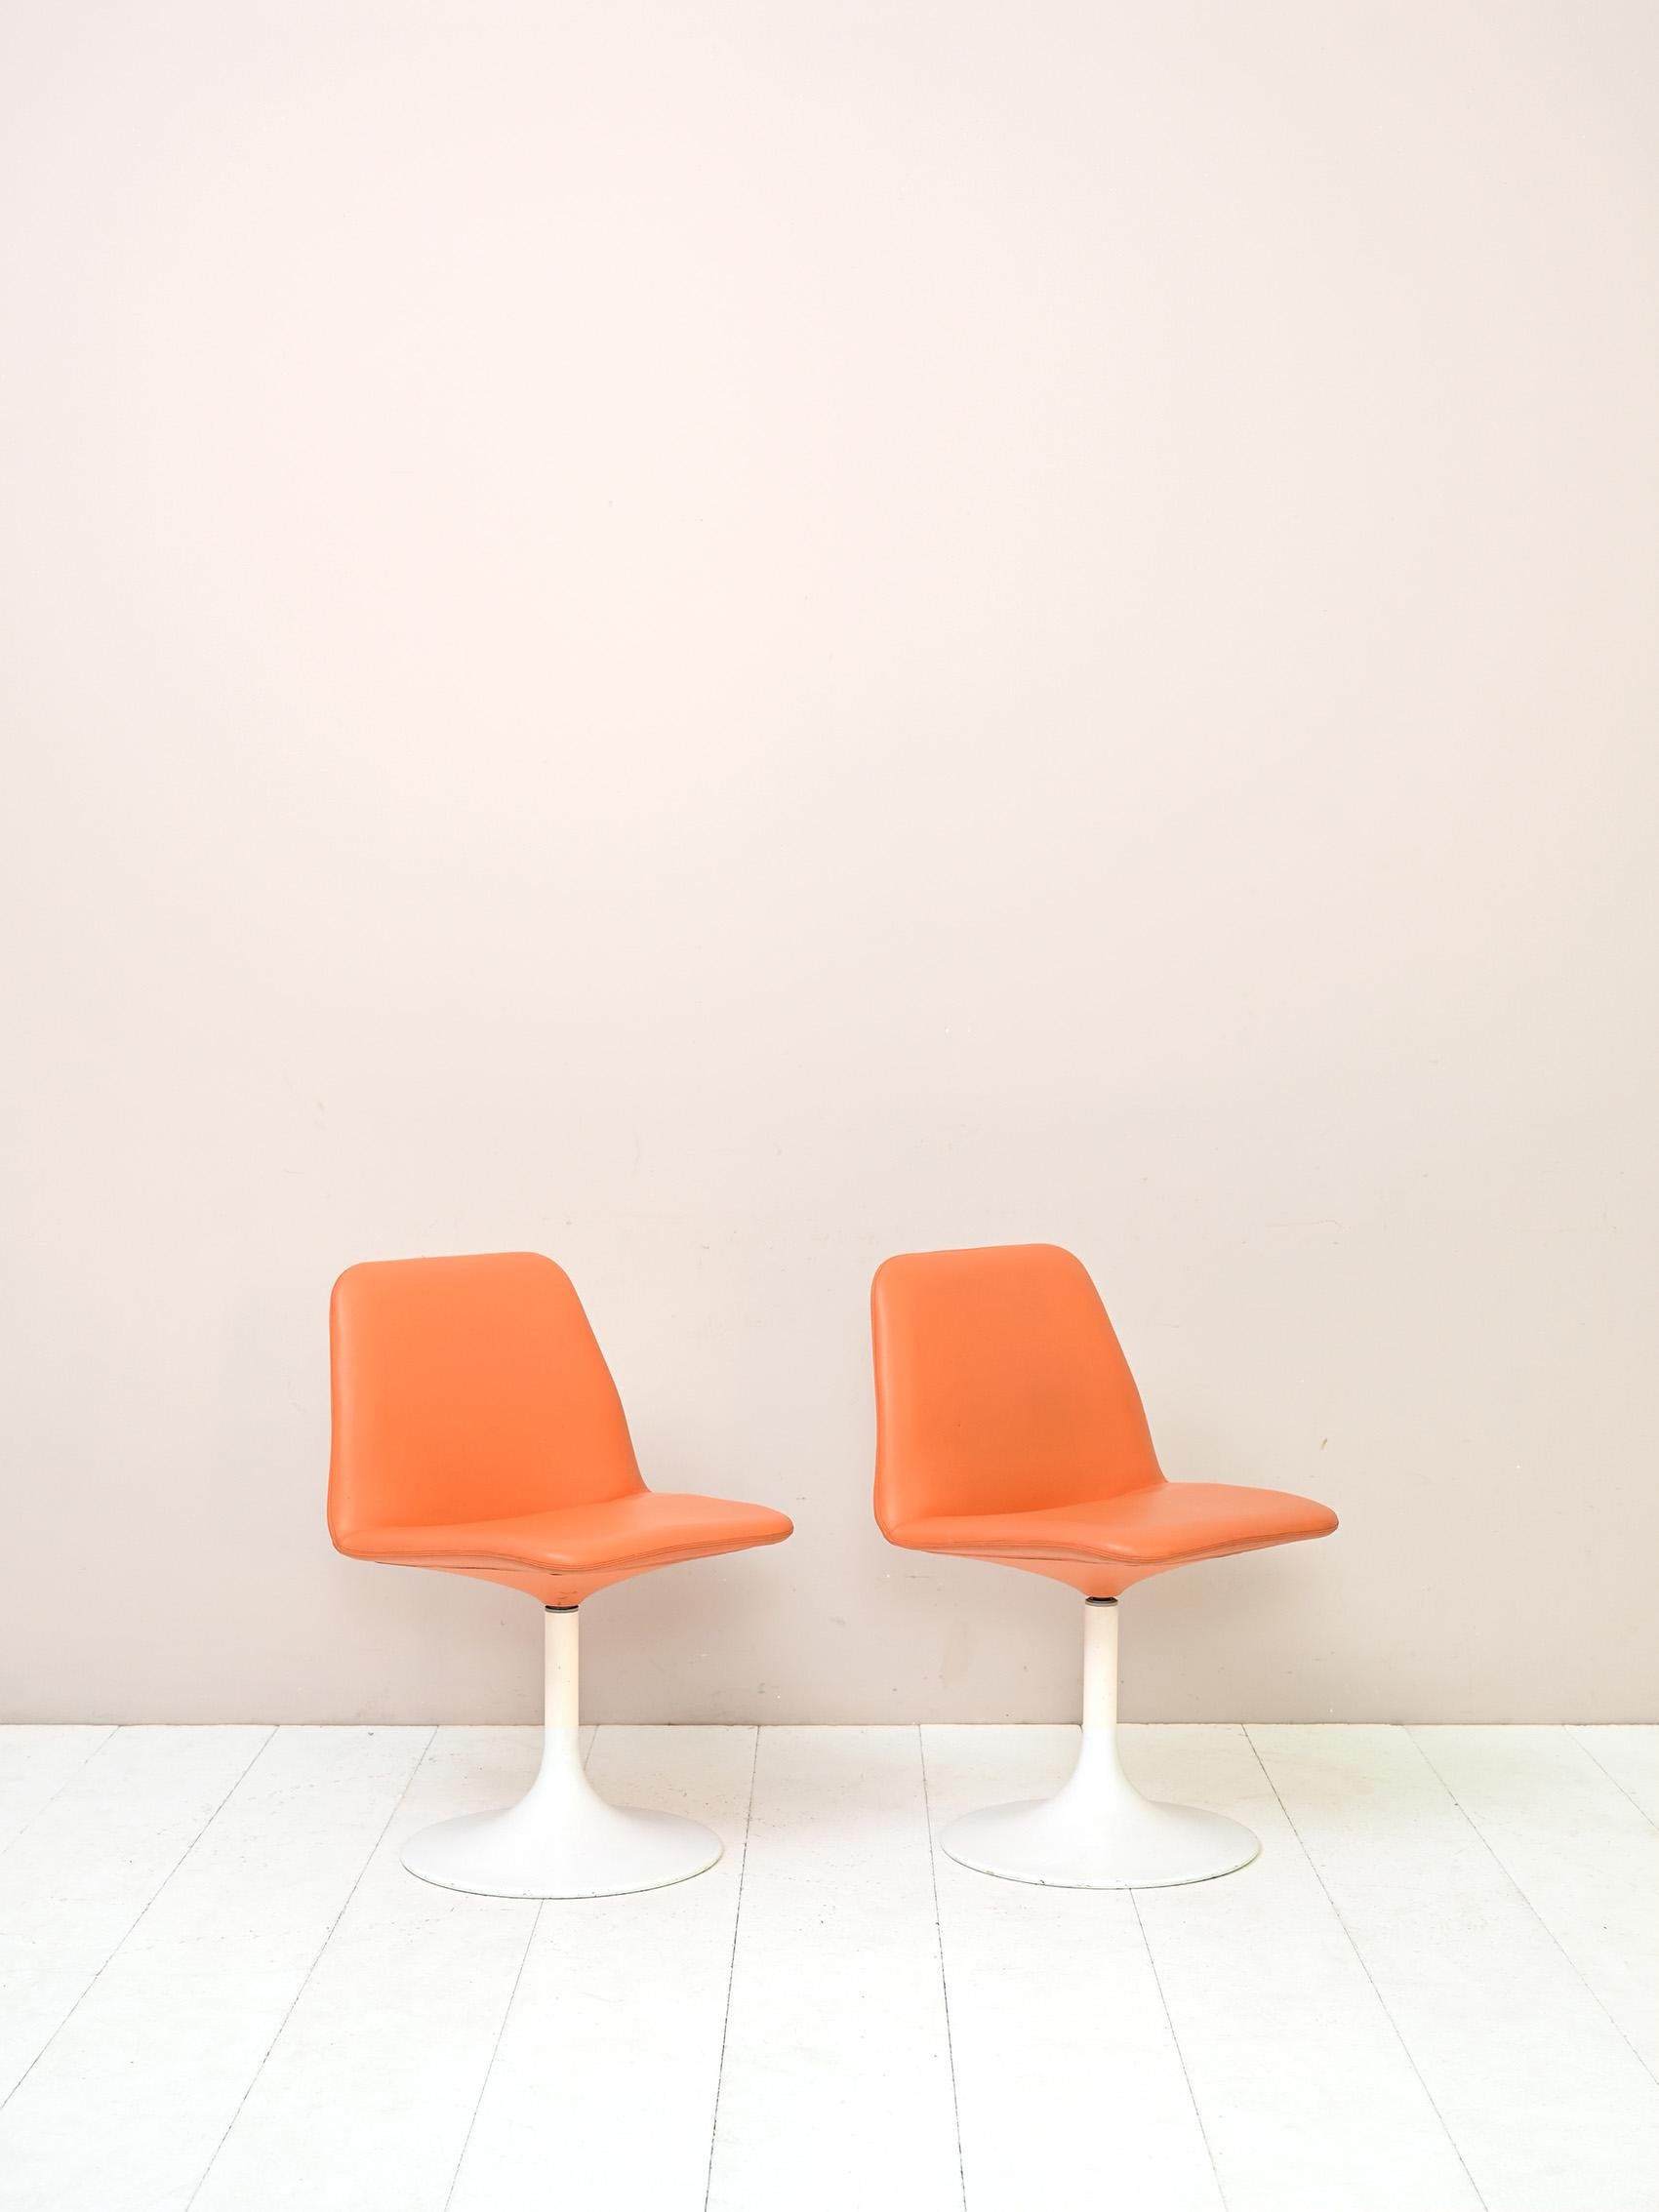 Pair of original vintage Scandinavian chairs.

These modern and original spaceage style chairs feature a white metal base on which the upholstered swivel seat, lined with orange faux leather, interlocks.
Perfect for the office or as head